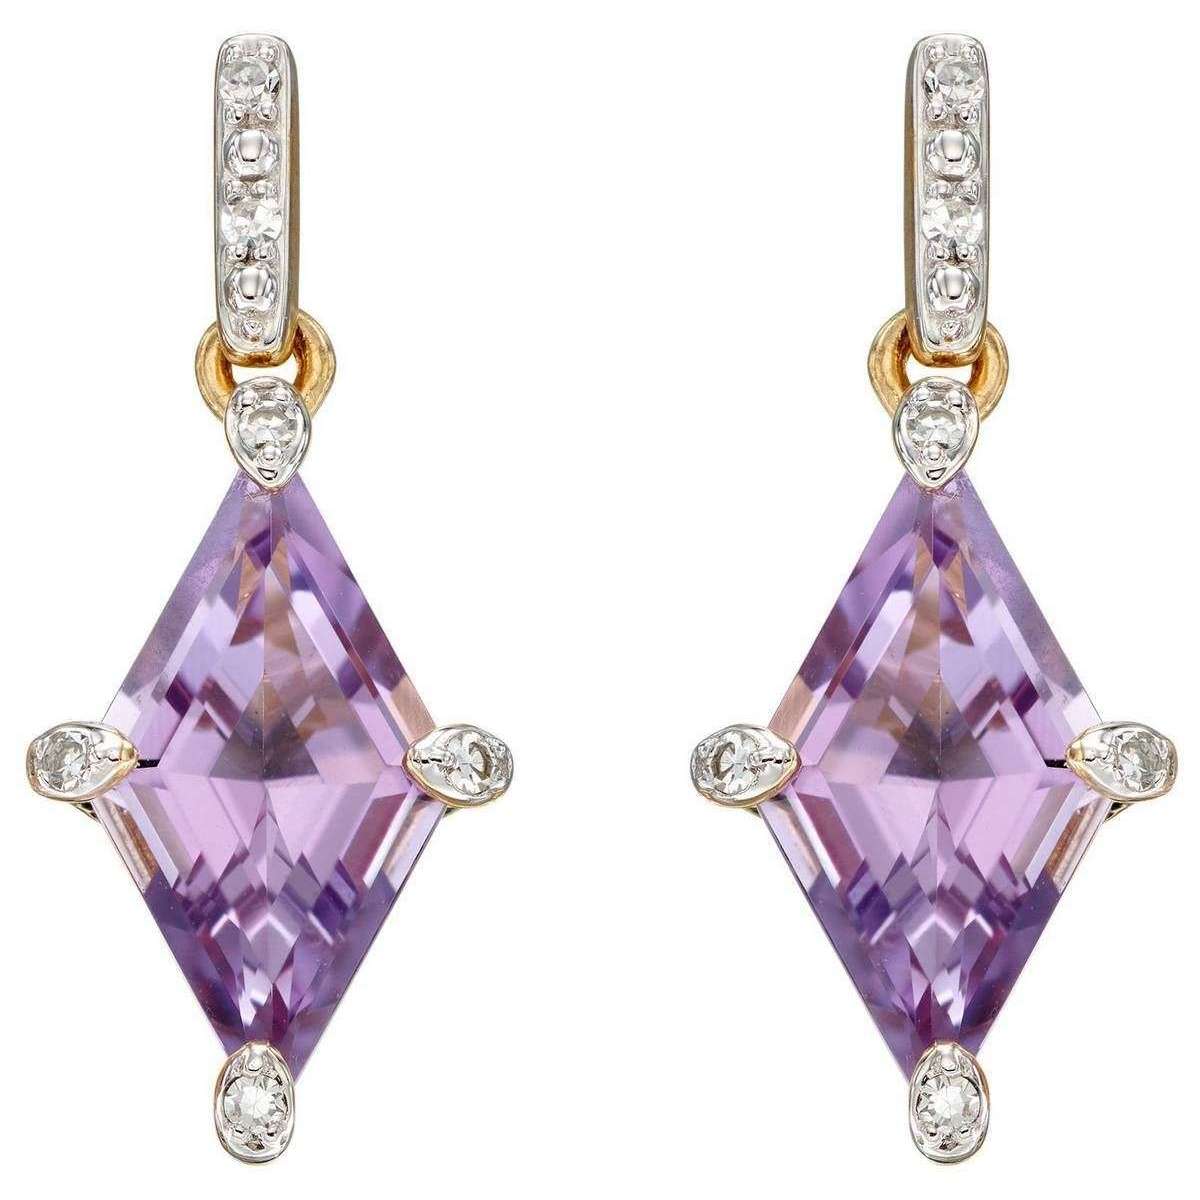 Elements Gold Kite Shaped Amethyst Earrings - Puprle/Gold